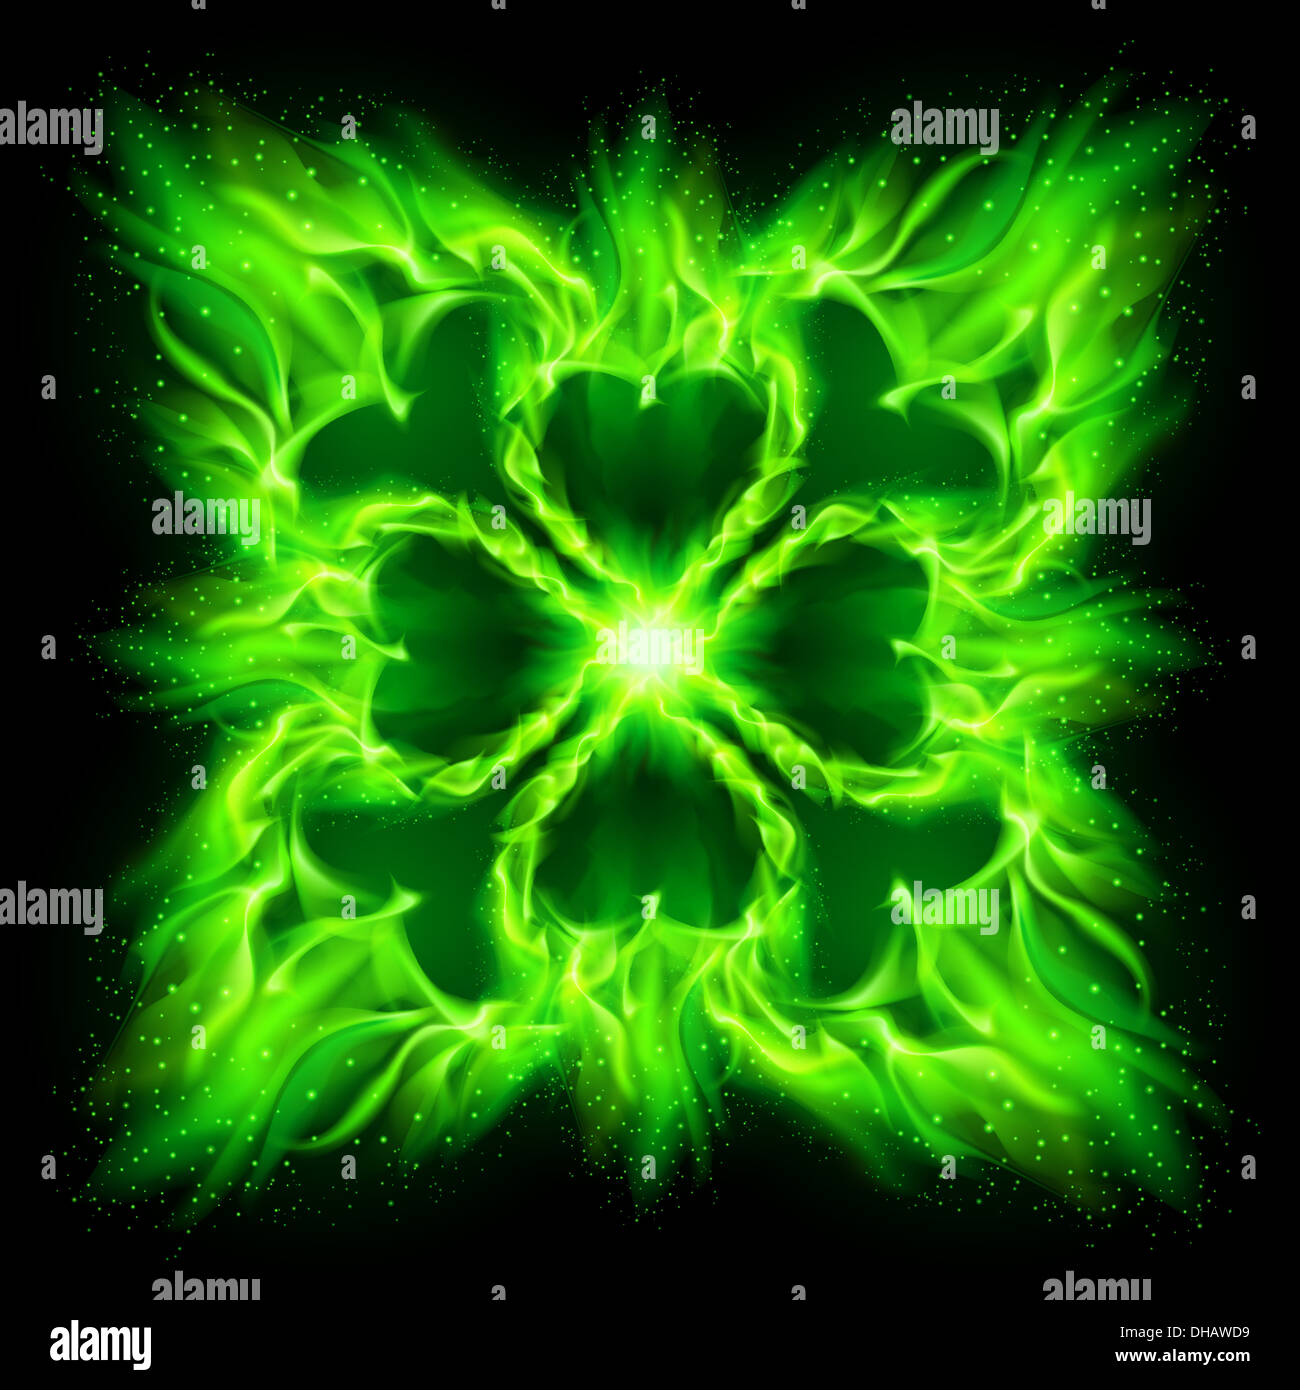 Green fire Gothic pattern on black background. Stock Photo